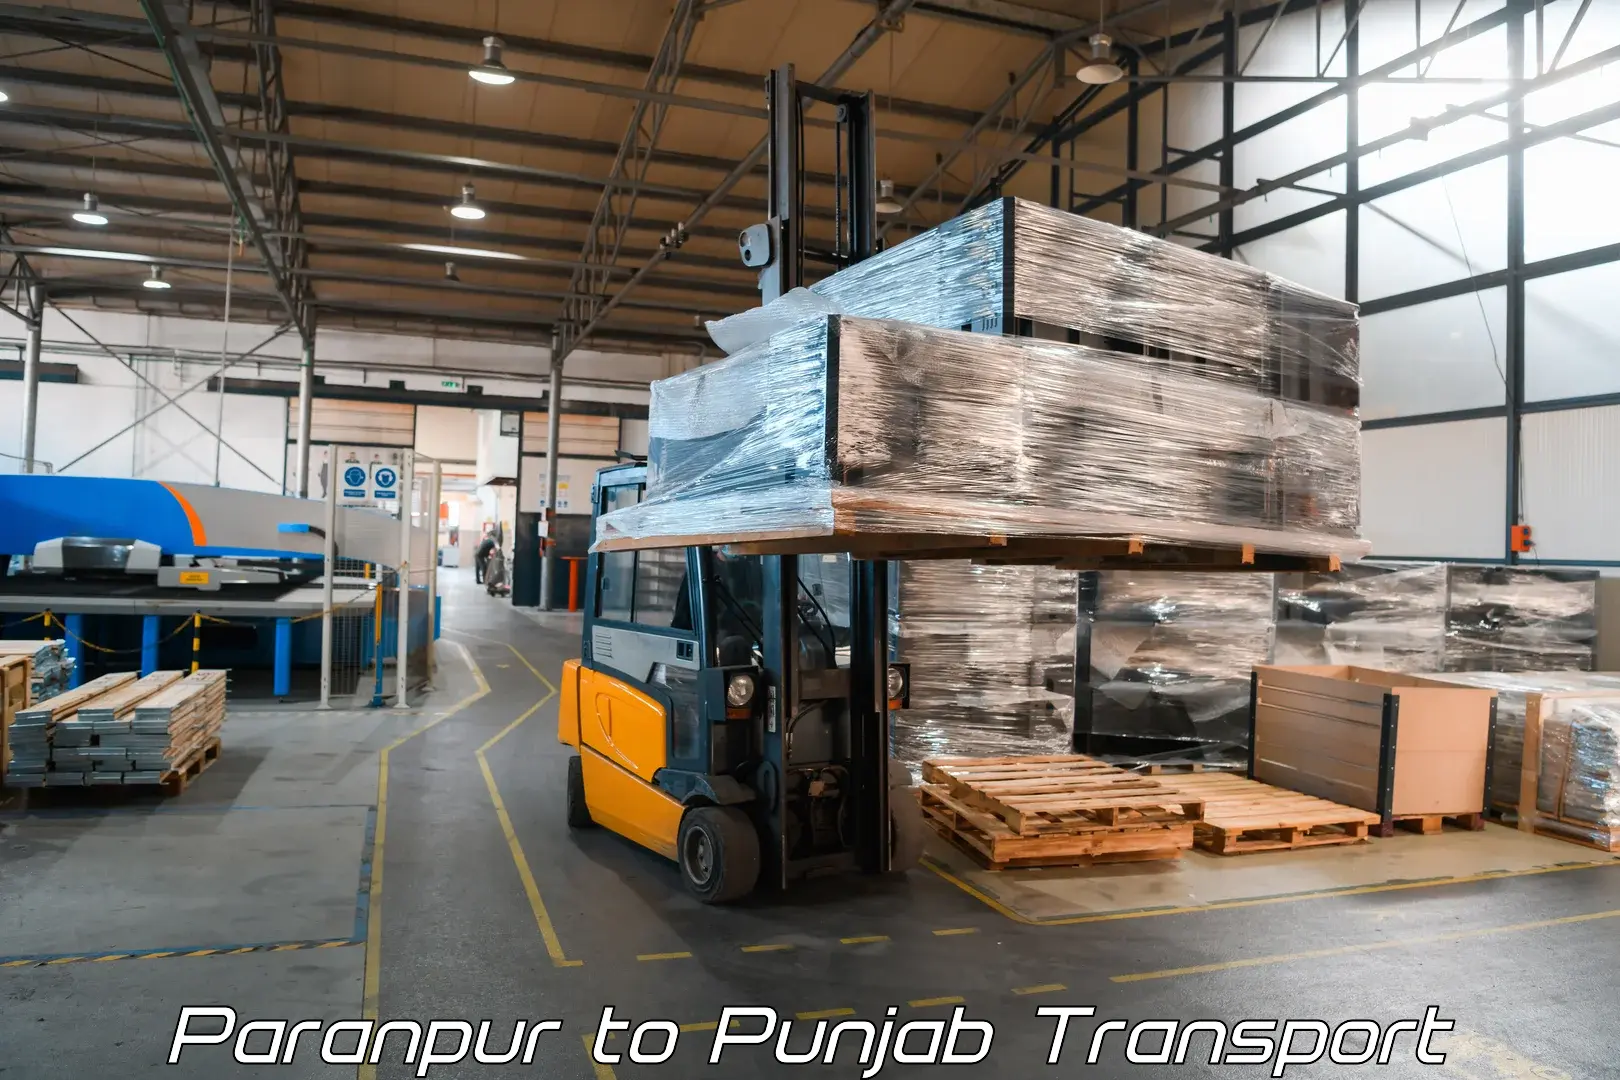 Air cargo transport services Paranpur to Bathinda